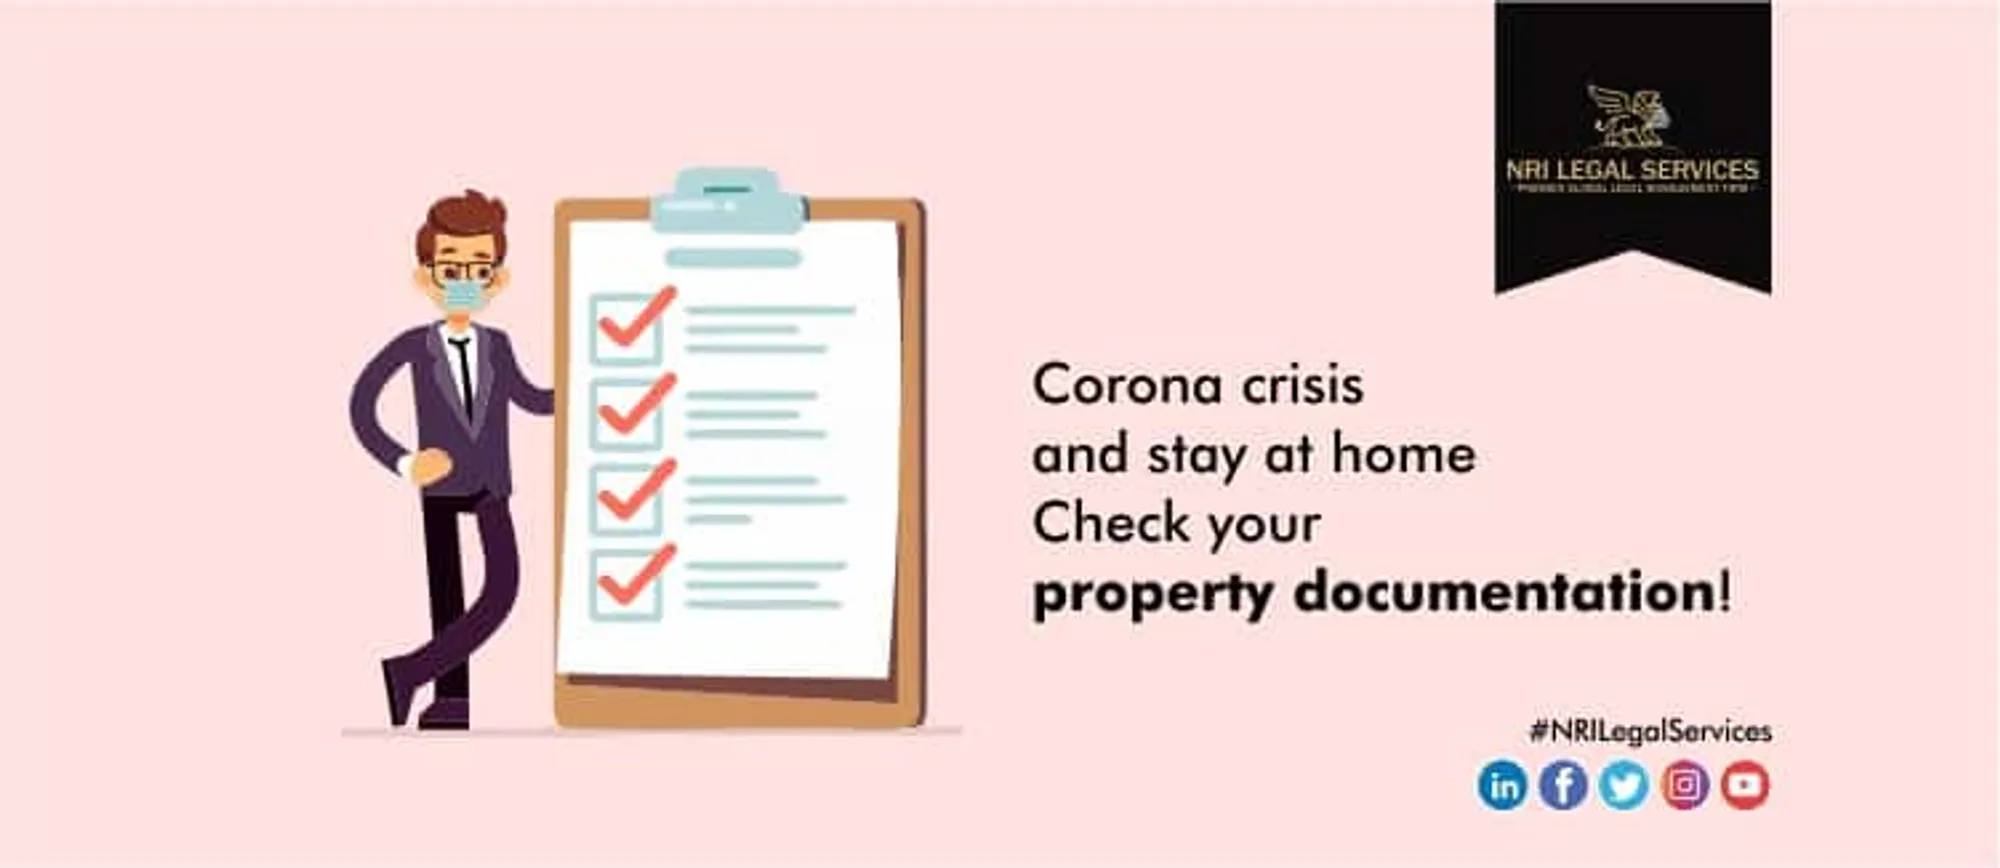 Corona crisis and stay at home - check your property documentation